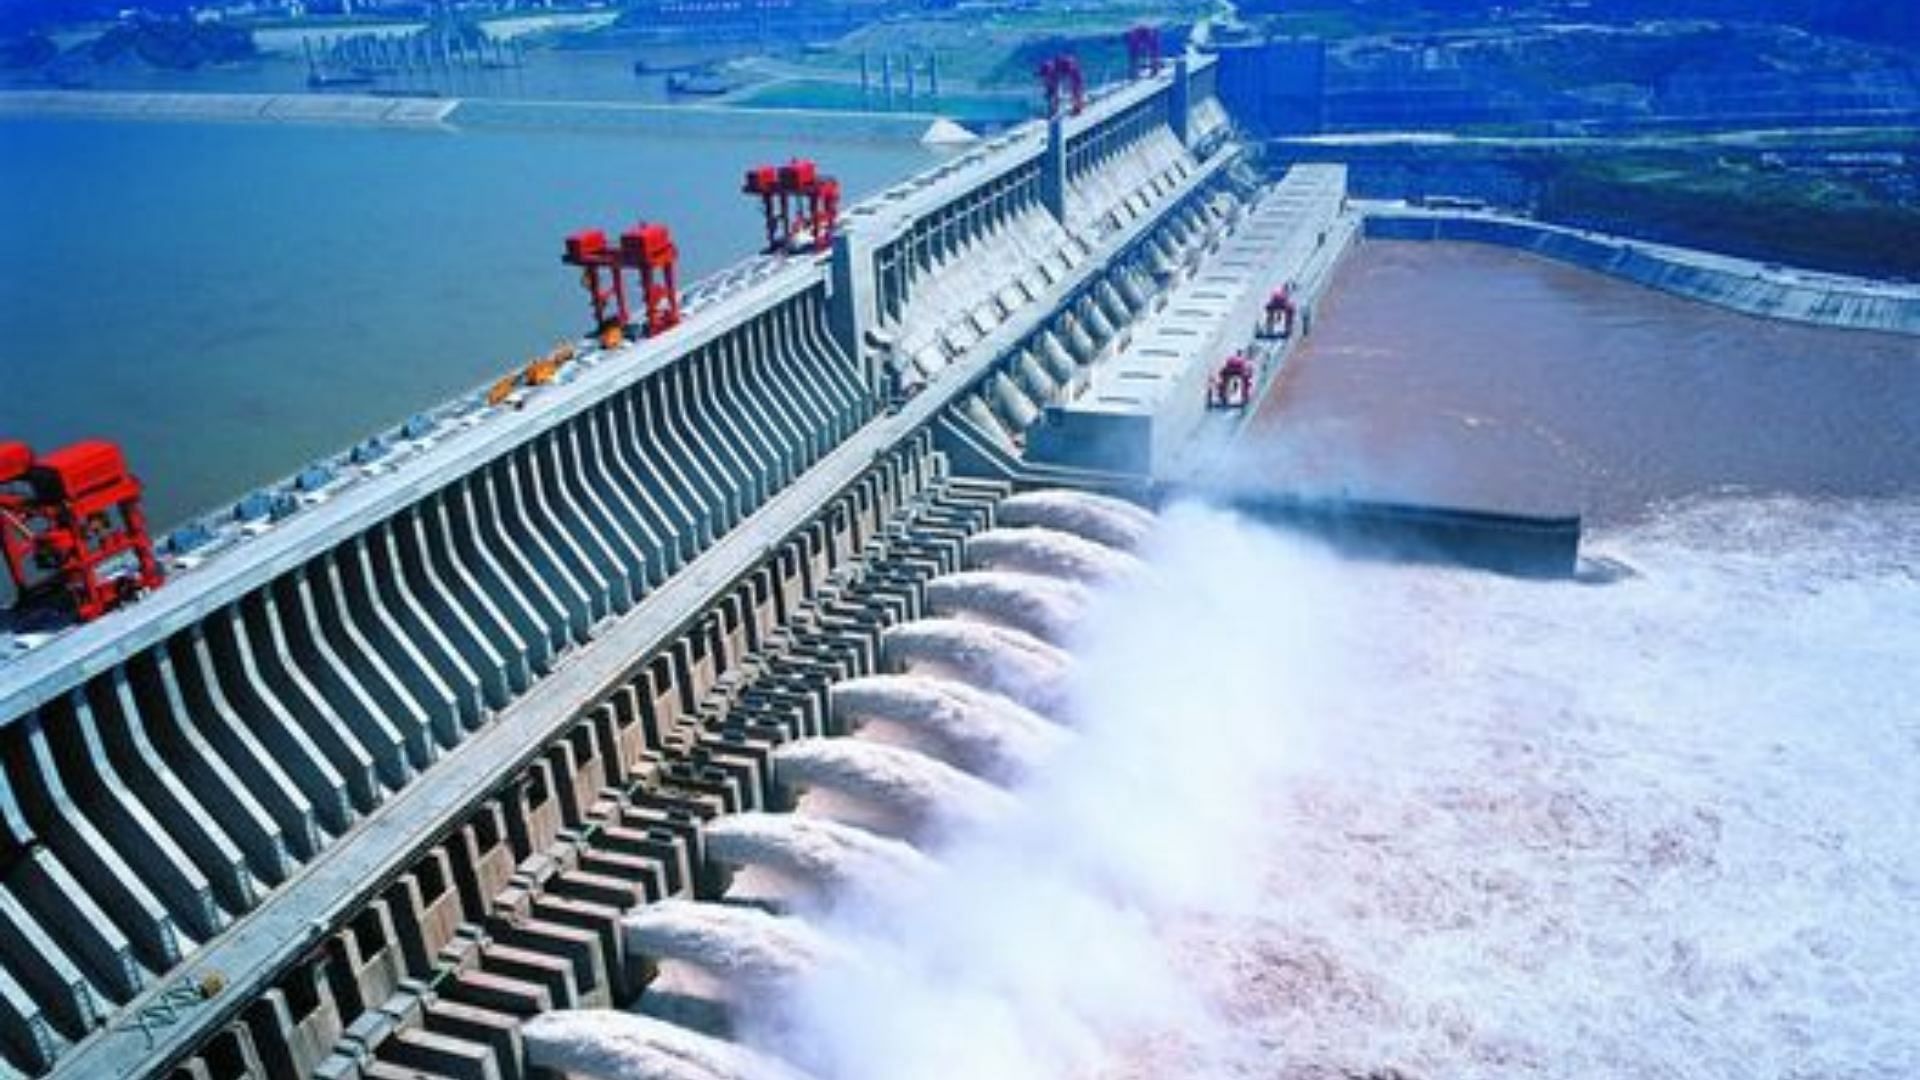 Worlds Largest Dam And Most Expensive Dam In The World The Three Gorges Dam in China